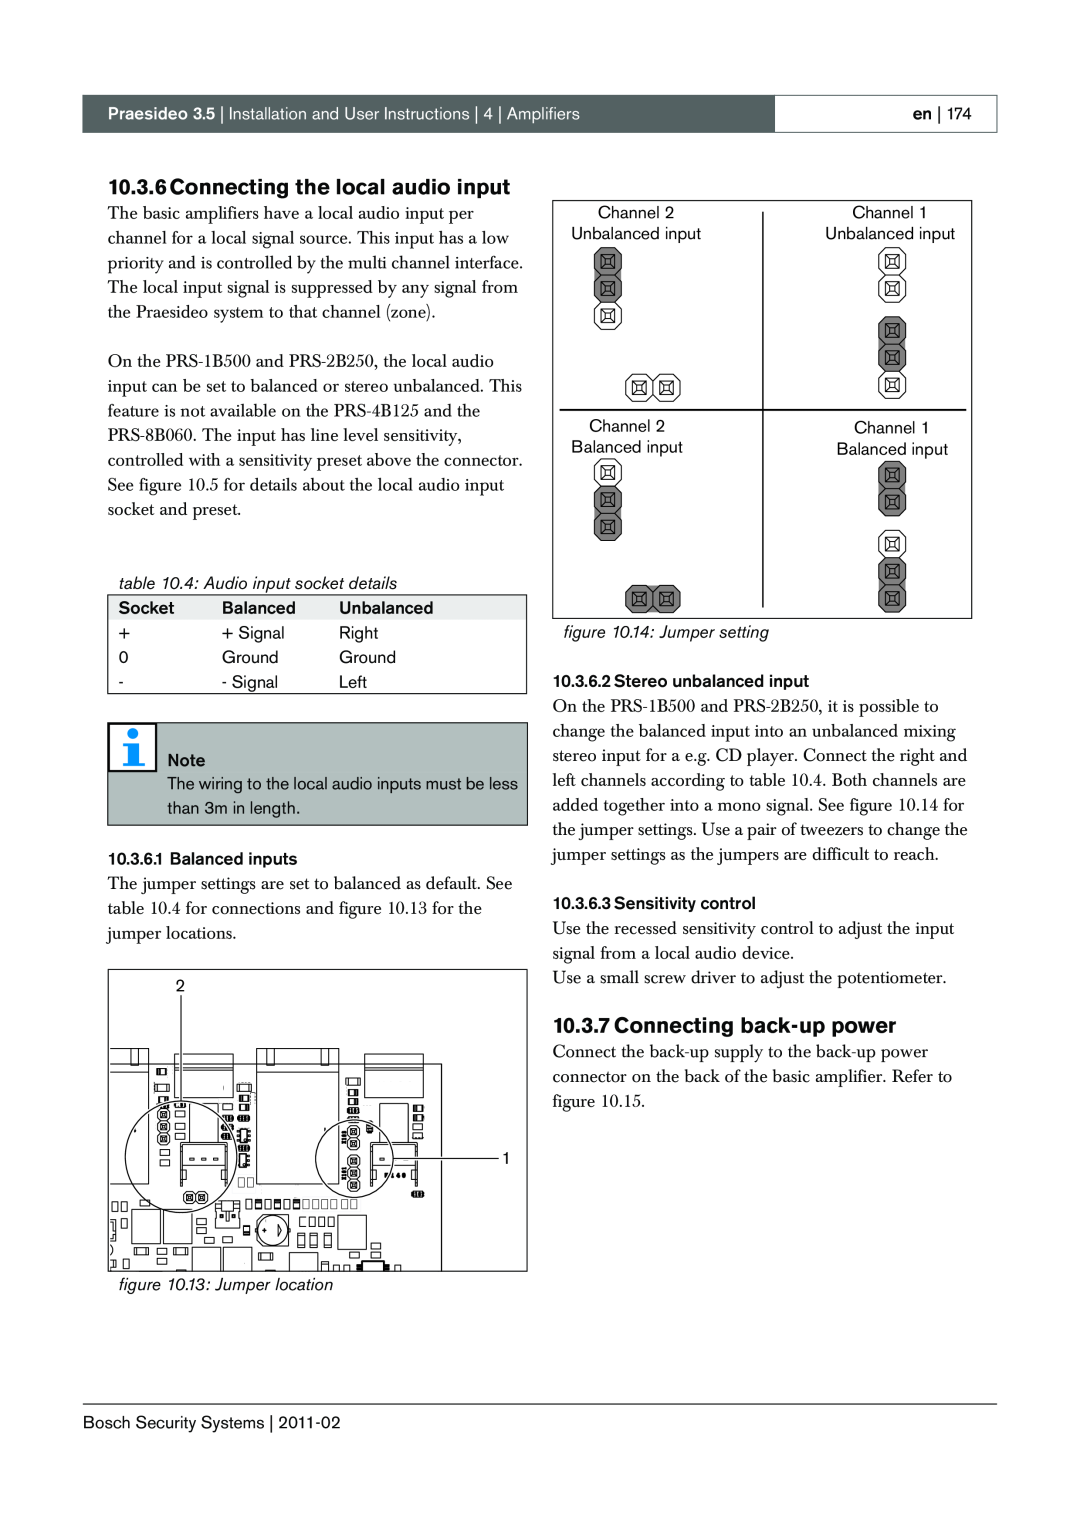 Bosch Appliances 3.5 manual Connecting the local audio input, Connecting back-uppower, 4: Audio input socket details 